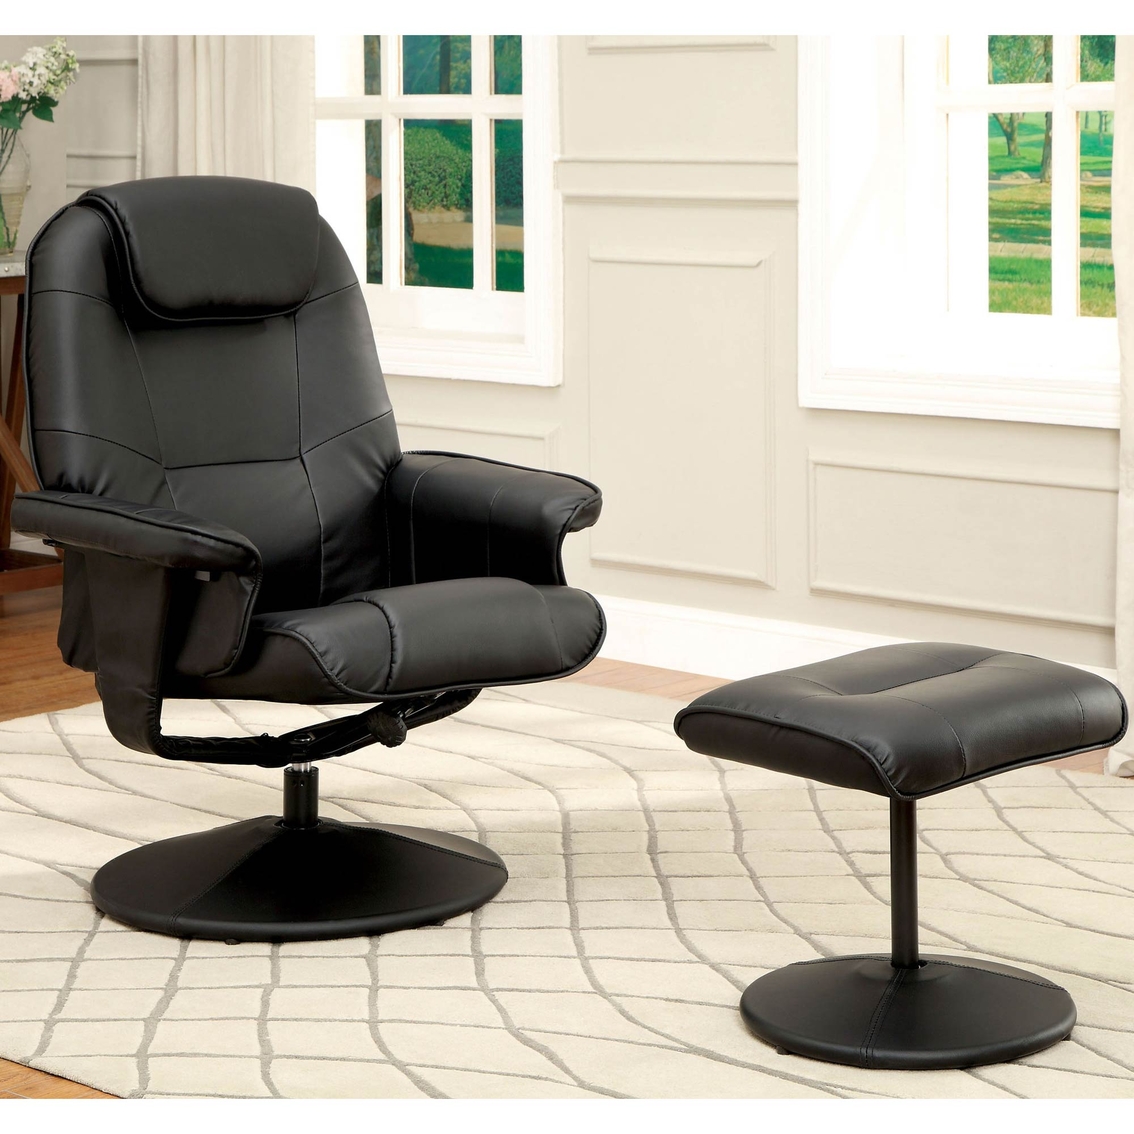 Furniture Of America Swivel Chair With Ottoman | Chairs & Recliners ...